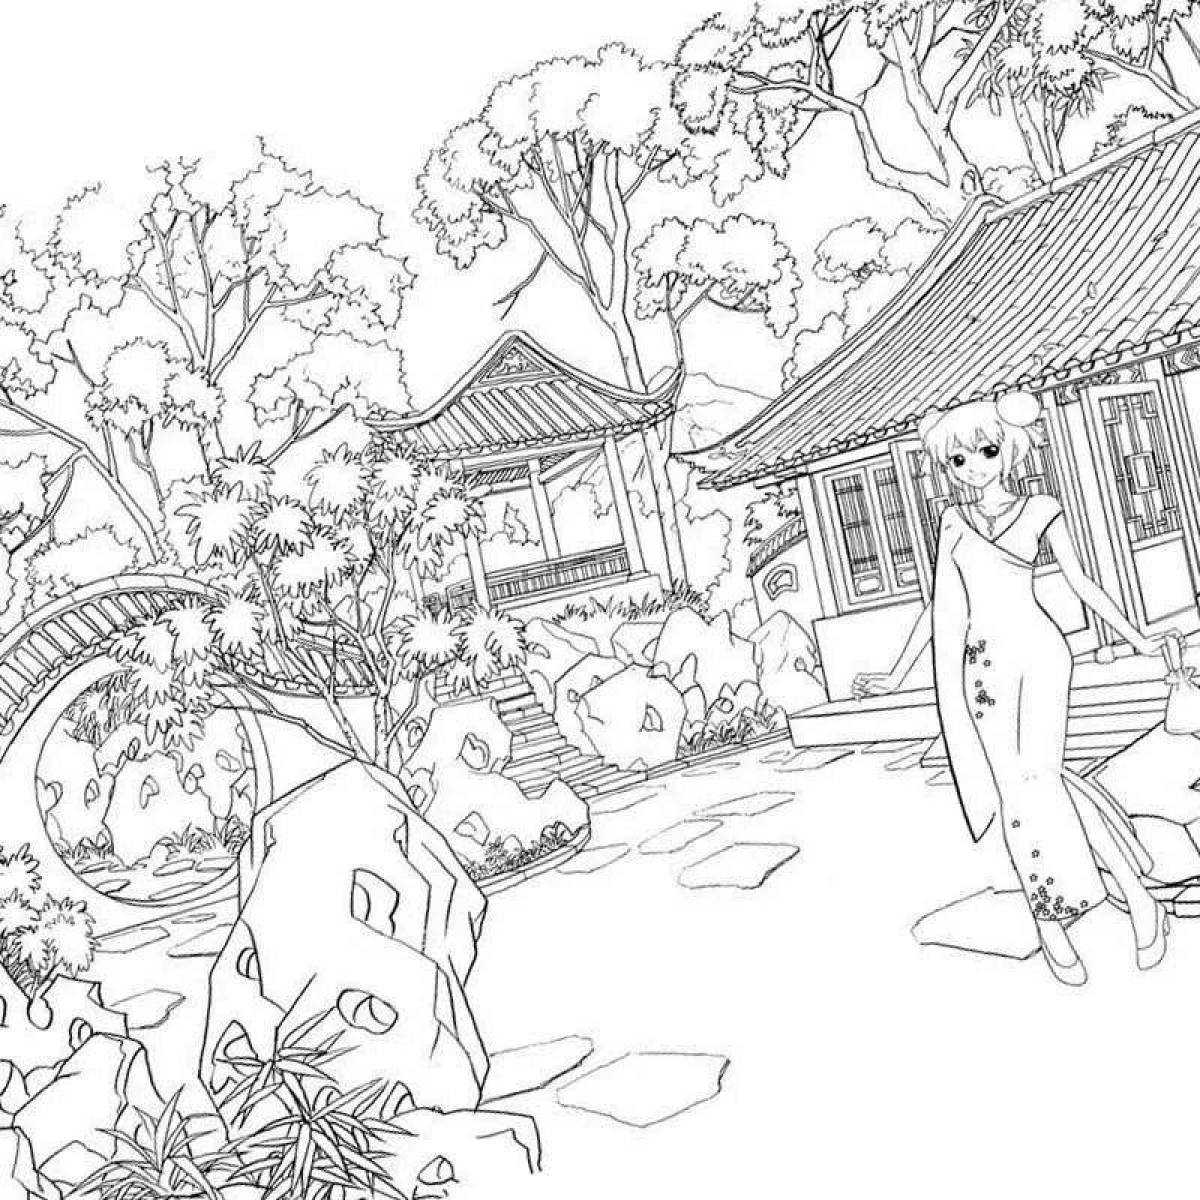 Coloring book for bright Japanese landscape